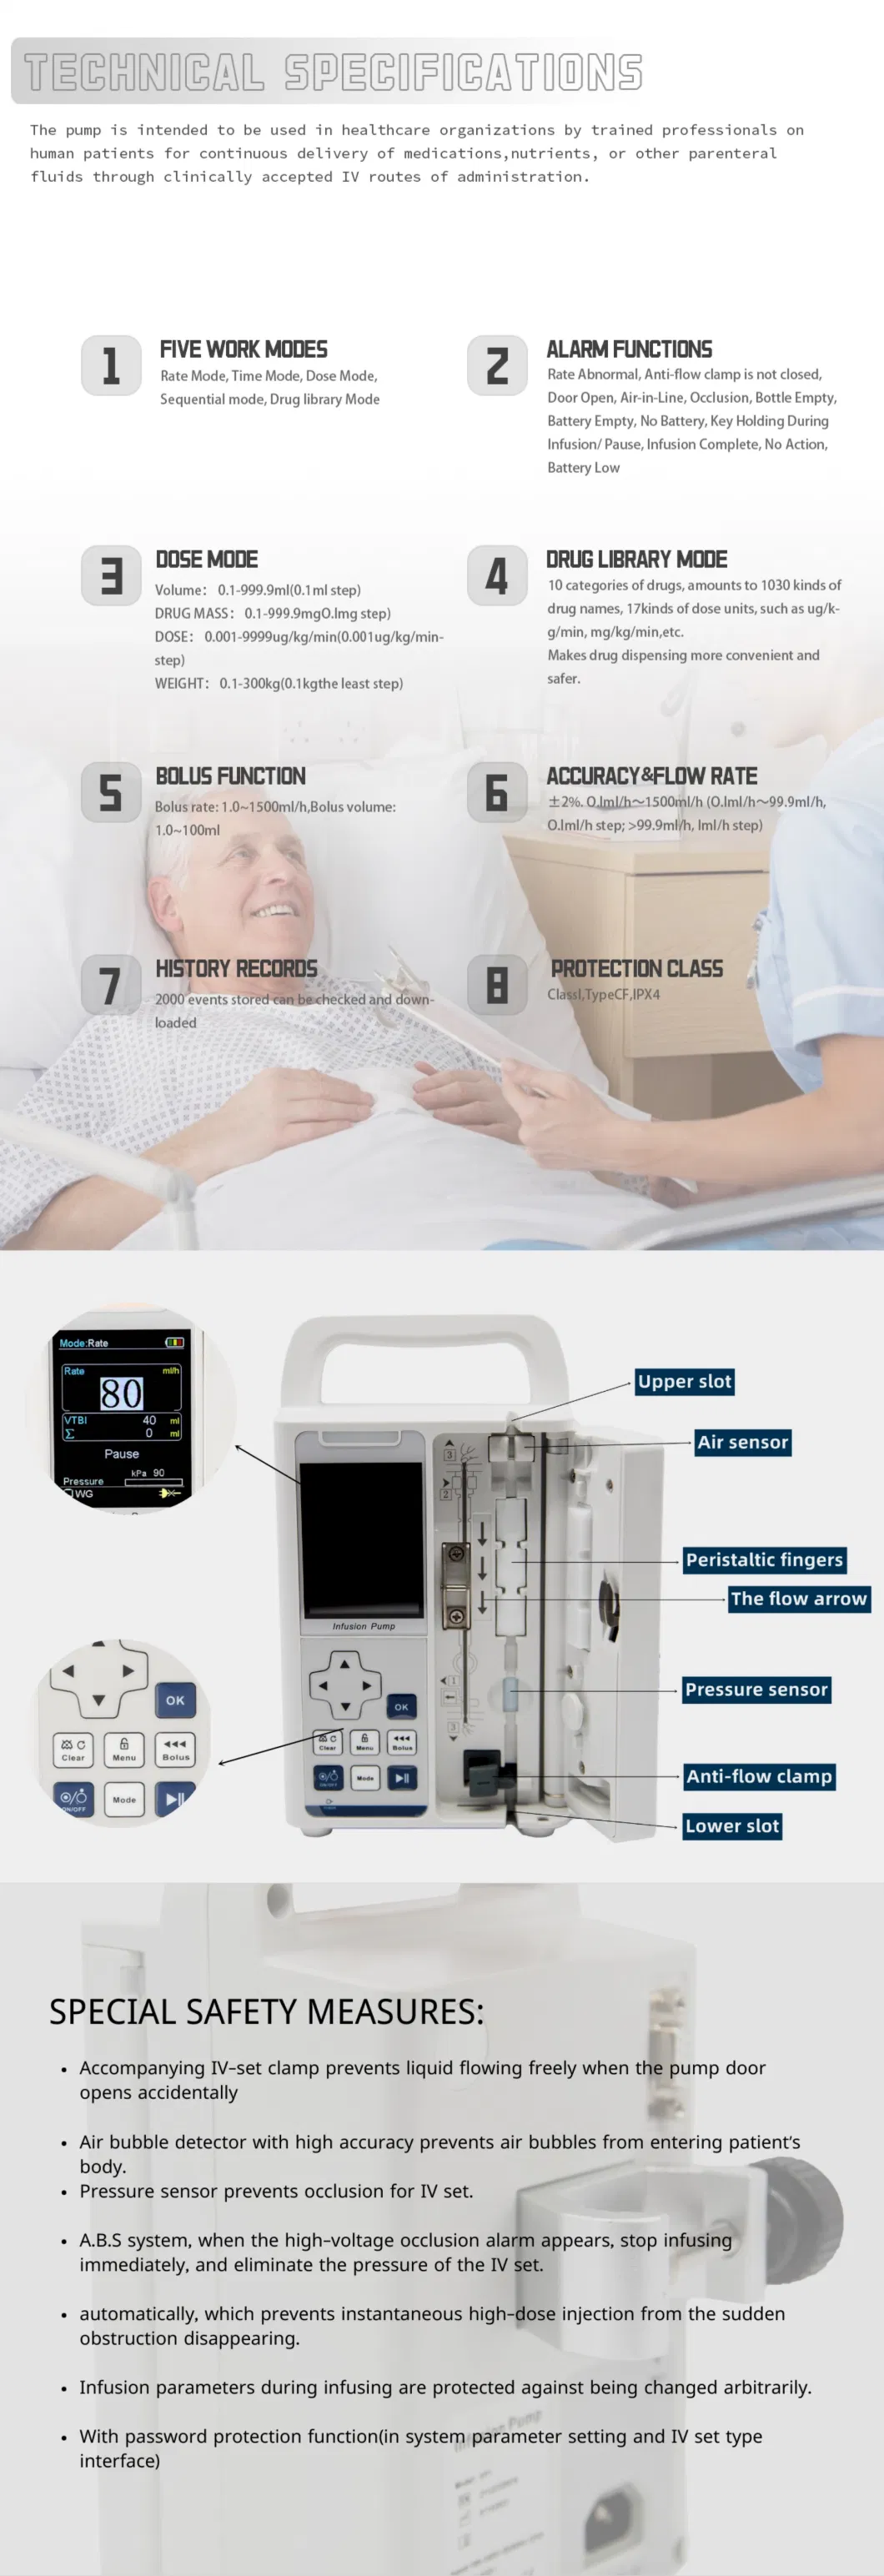 Small Positive-Displacement Infusion Pump Used to Gradually Transfer Precise Volumes of Fluid